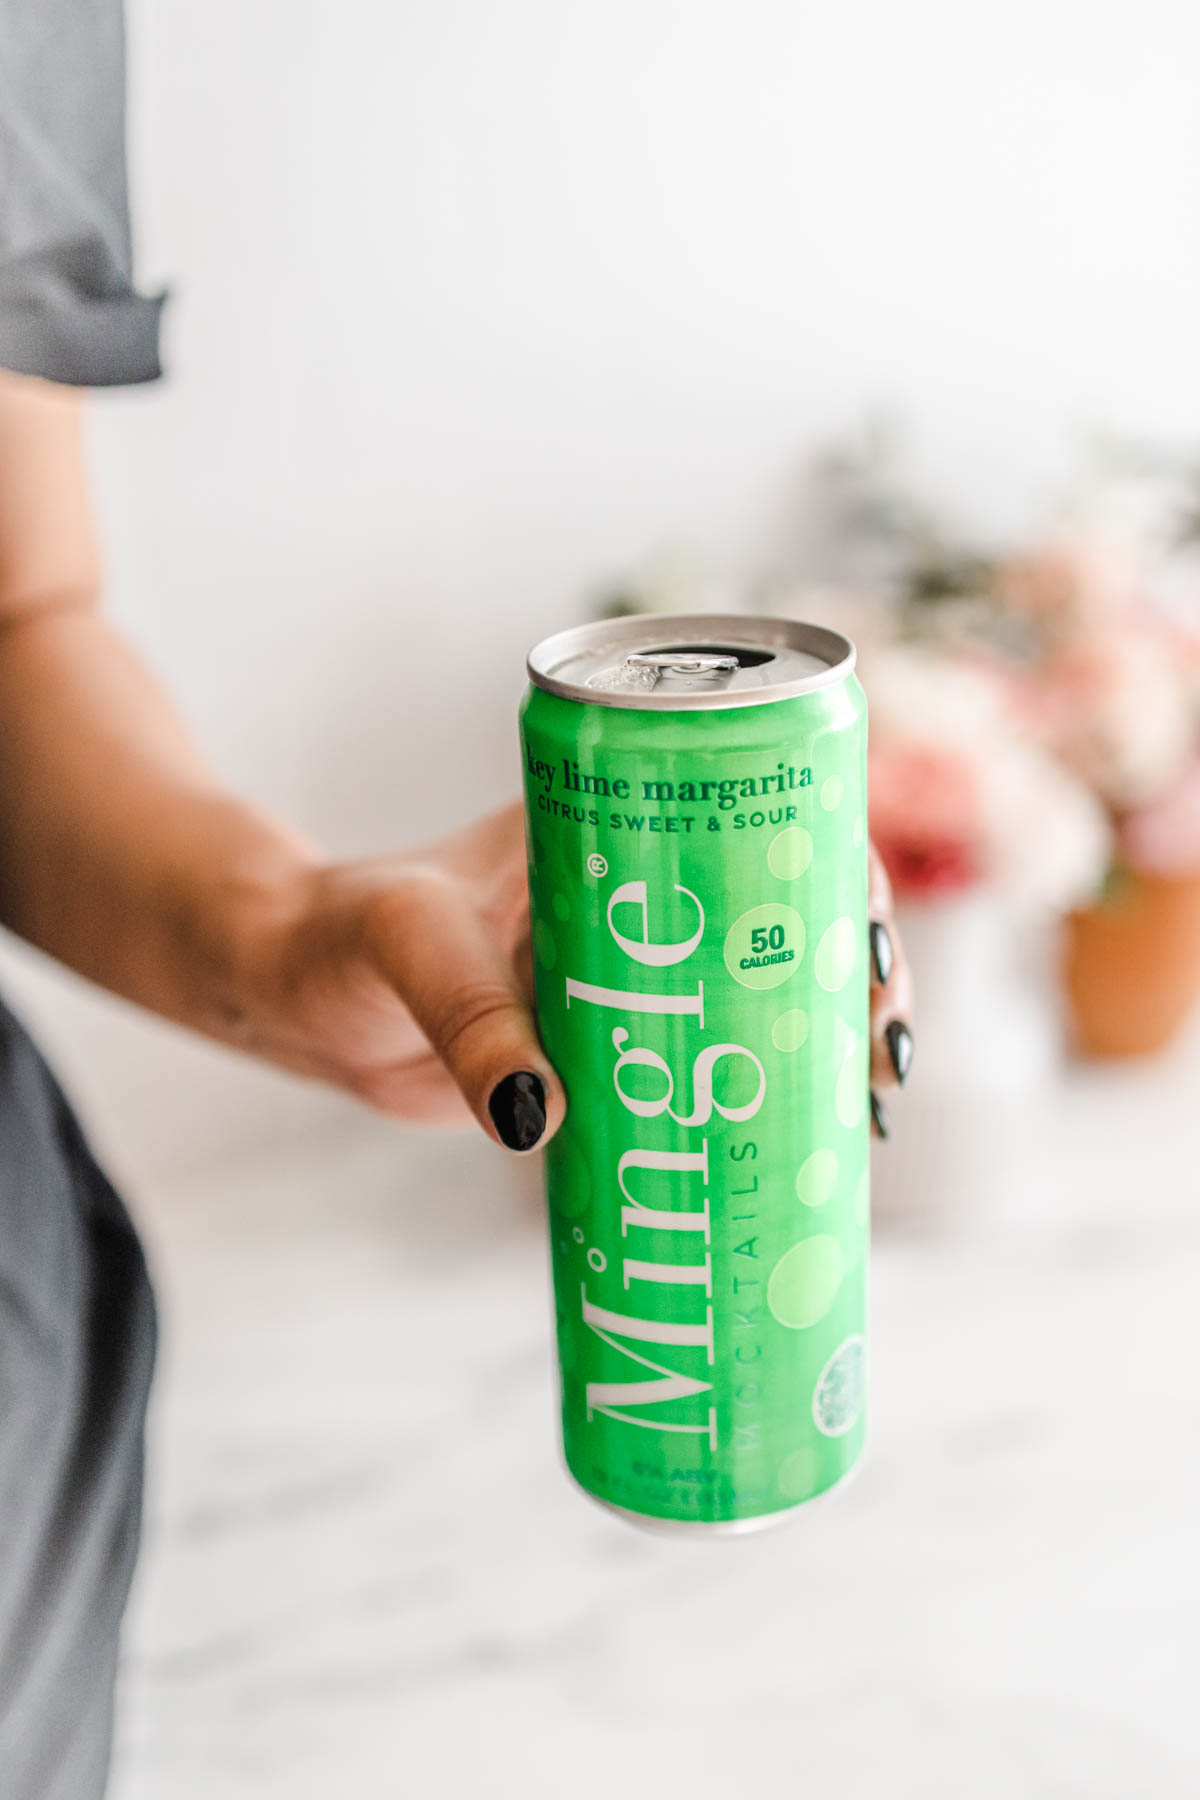 A hand holding a single can of Mingle Mocktails Key Lime Margarita.